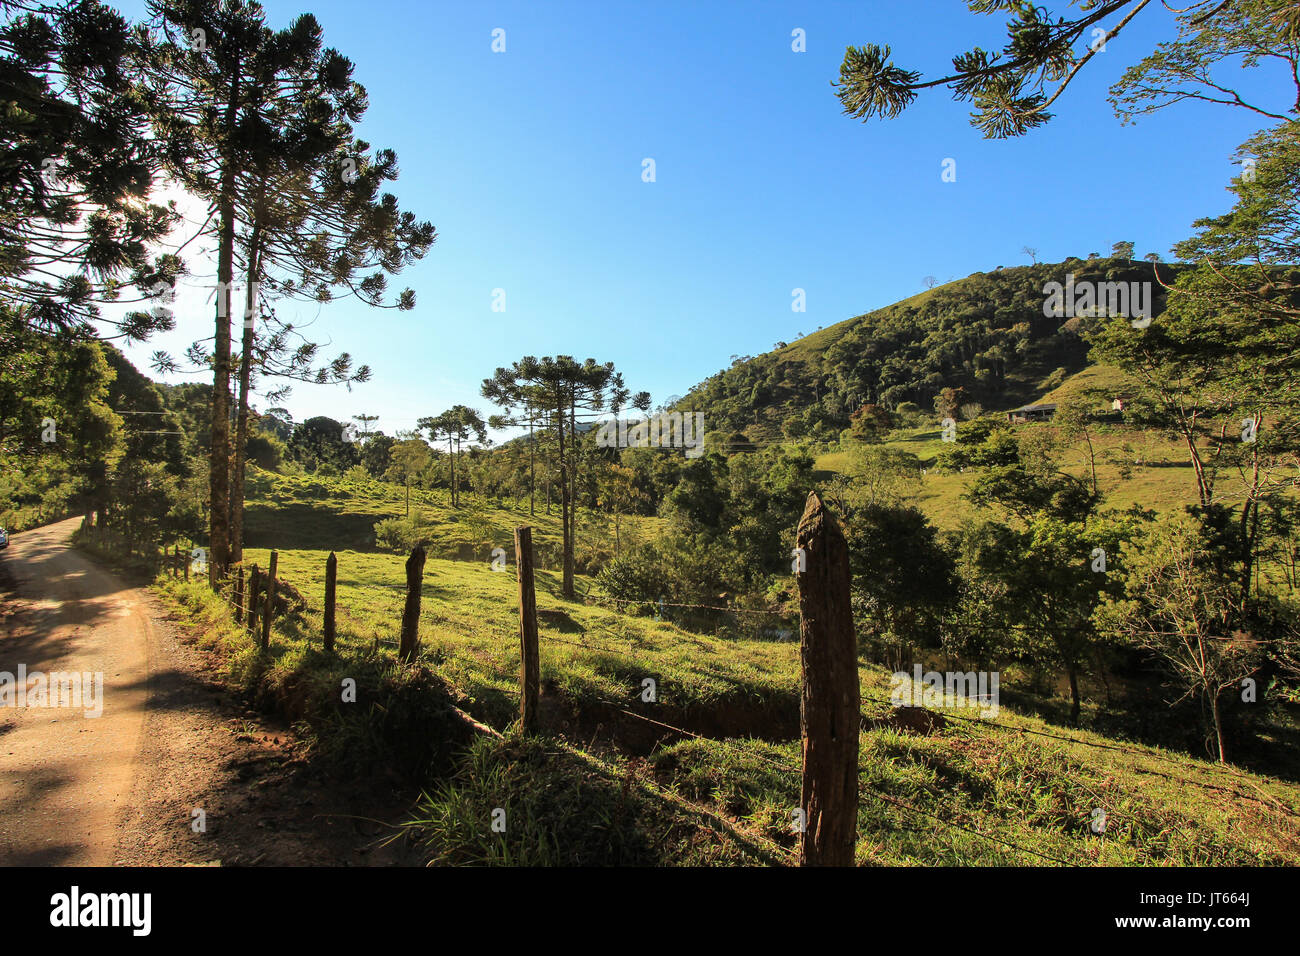 Landscape of dirt road in direction of city Goncalves. Minas Gerais State - Brazil Stock Photo